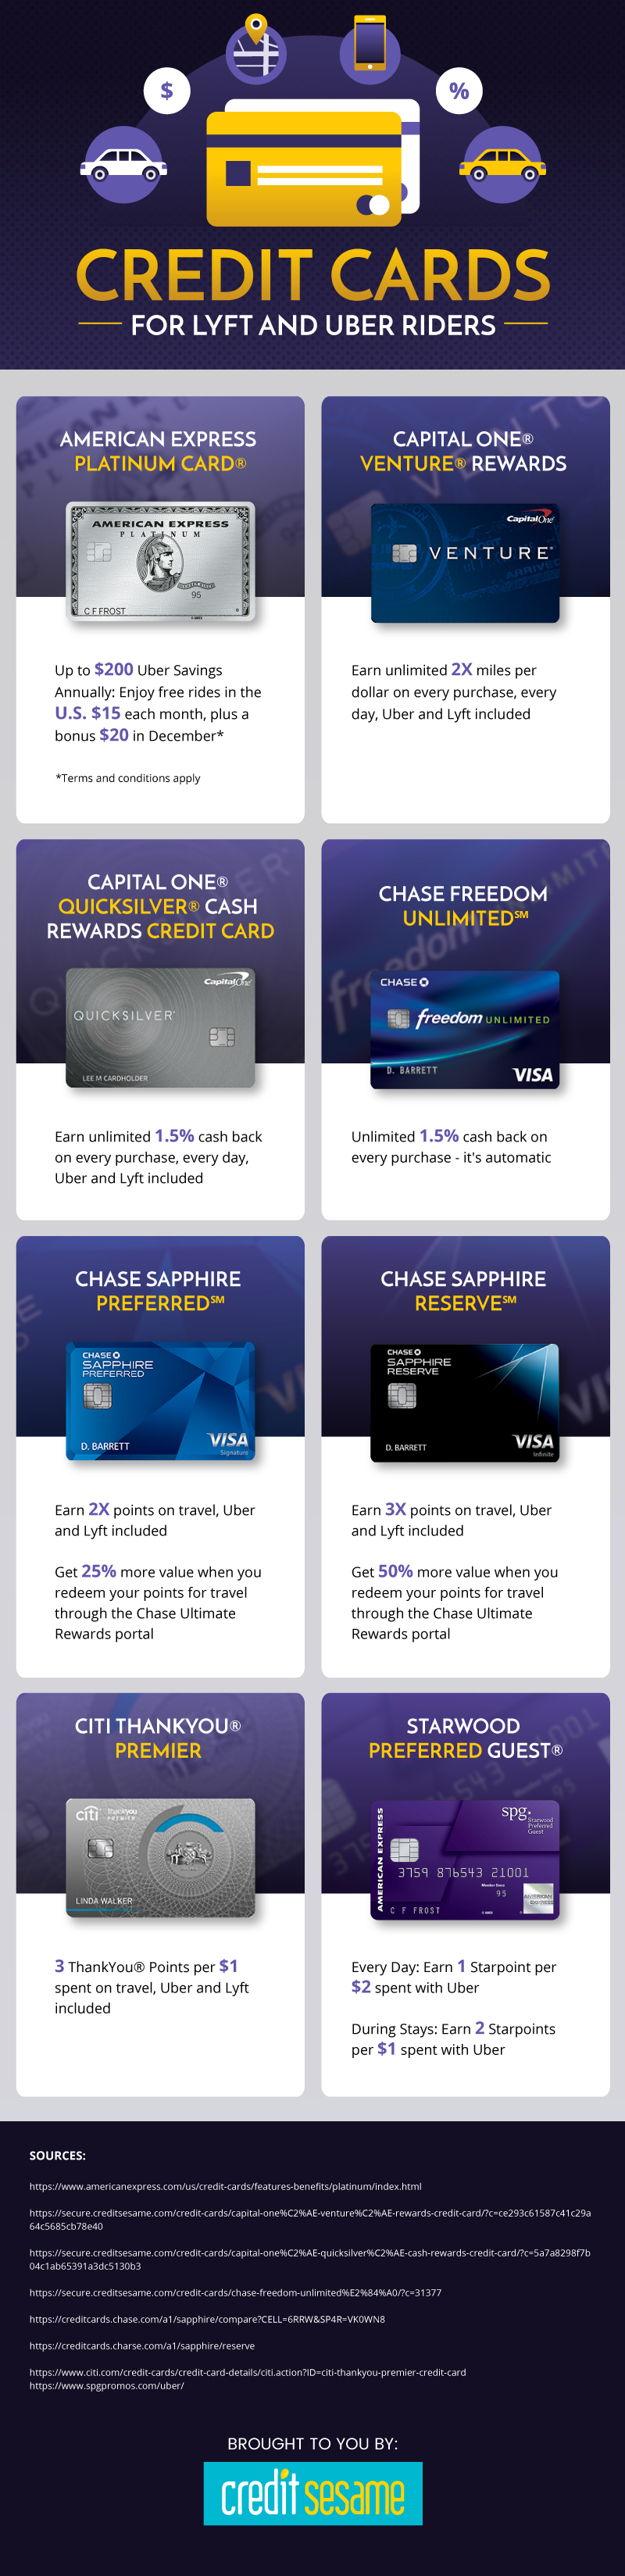 Infographic for Credit Cards for Lyft and Uber Riders